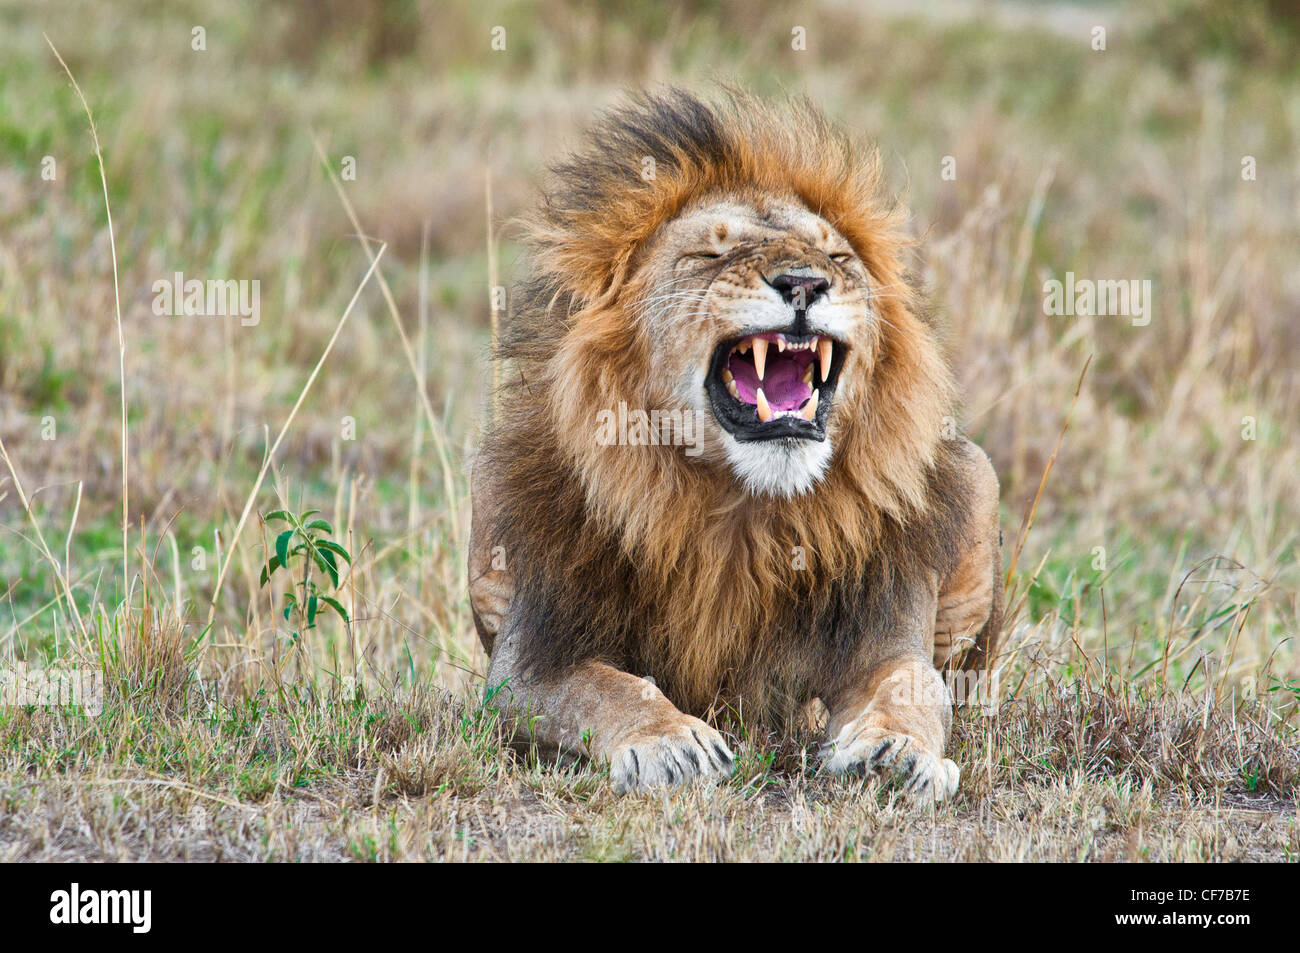 Male African Lion, Panthera leo, yawning with mouth open showing teeth and tongue, Masai Mara National Reserve, Kenya, Africa Stock Photo